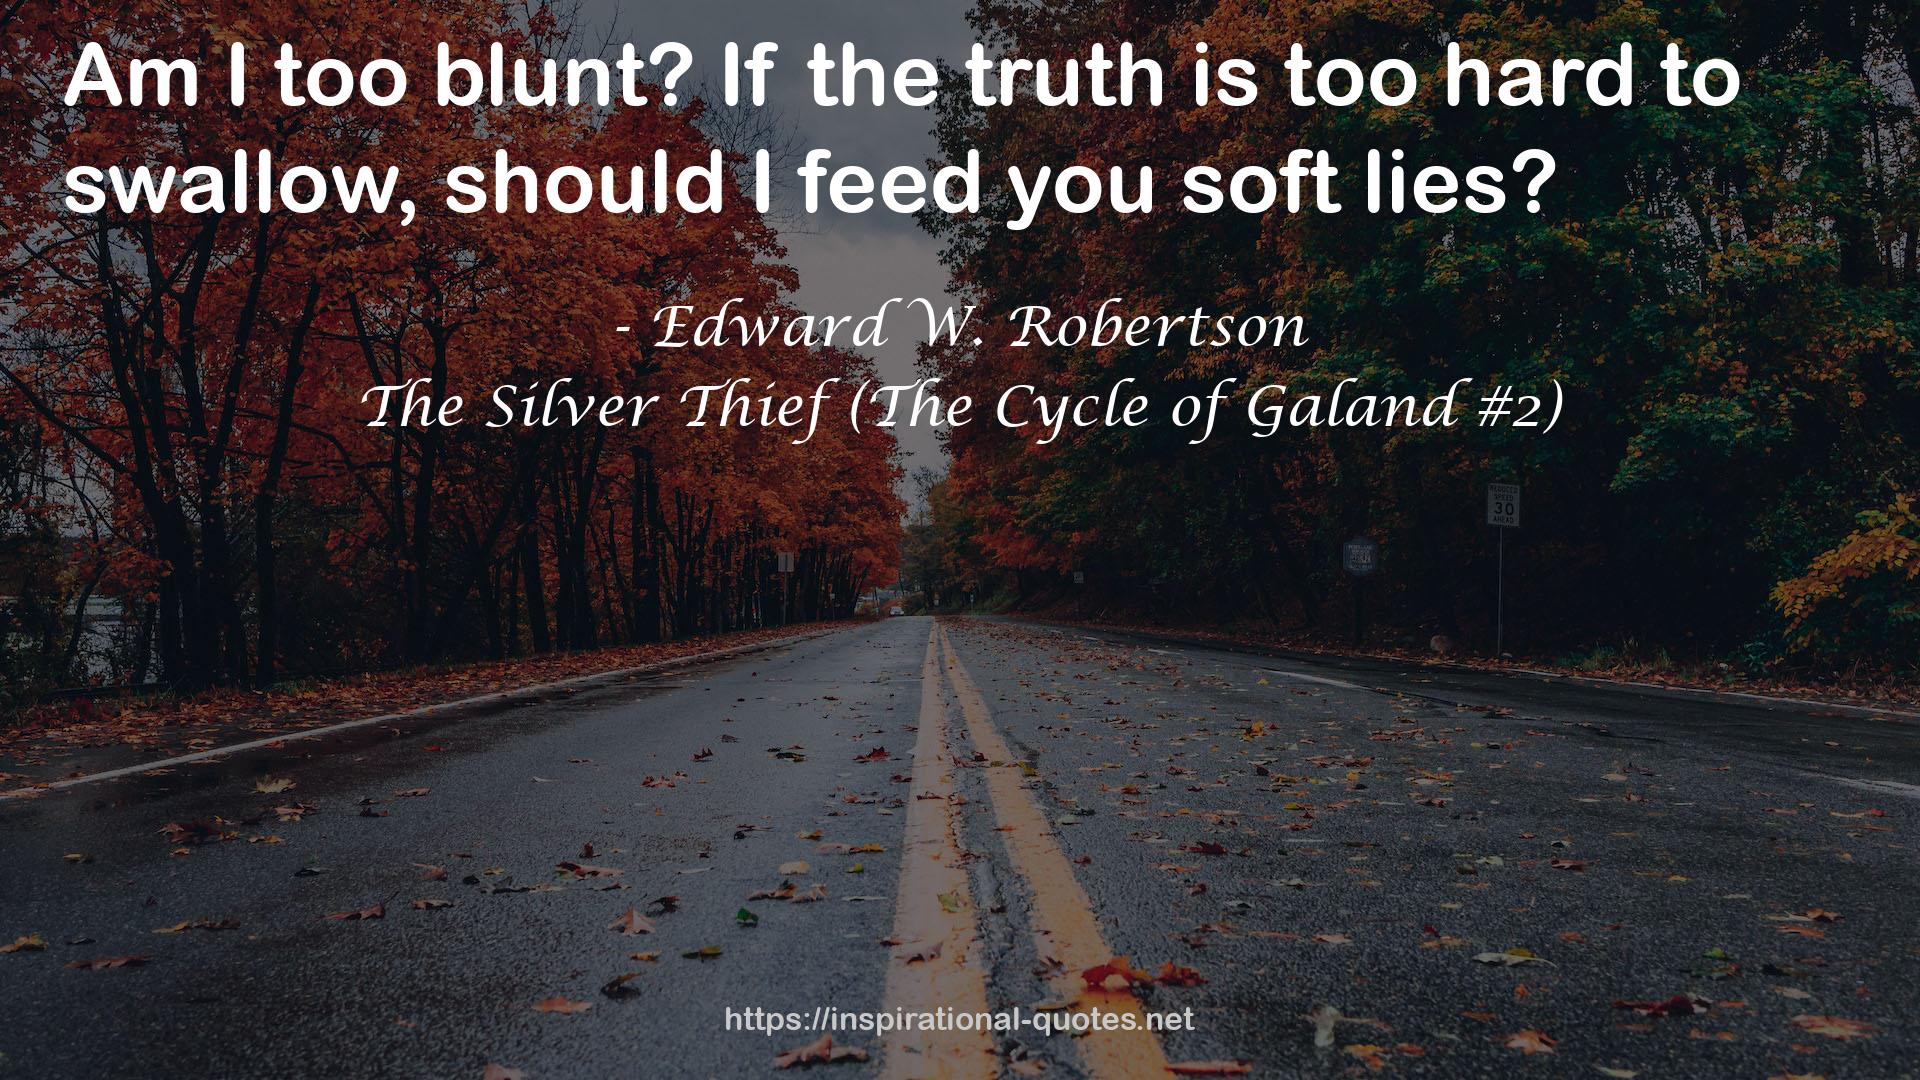 The Silver Thief (The Cycle of Galand #2) QUOTES